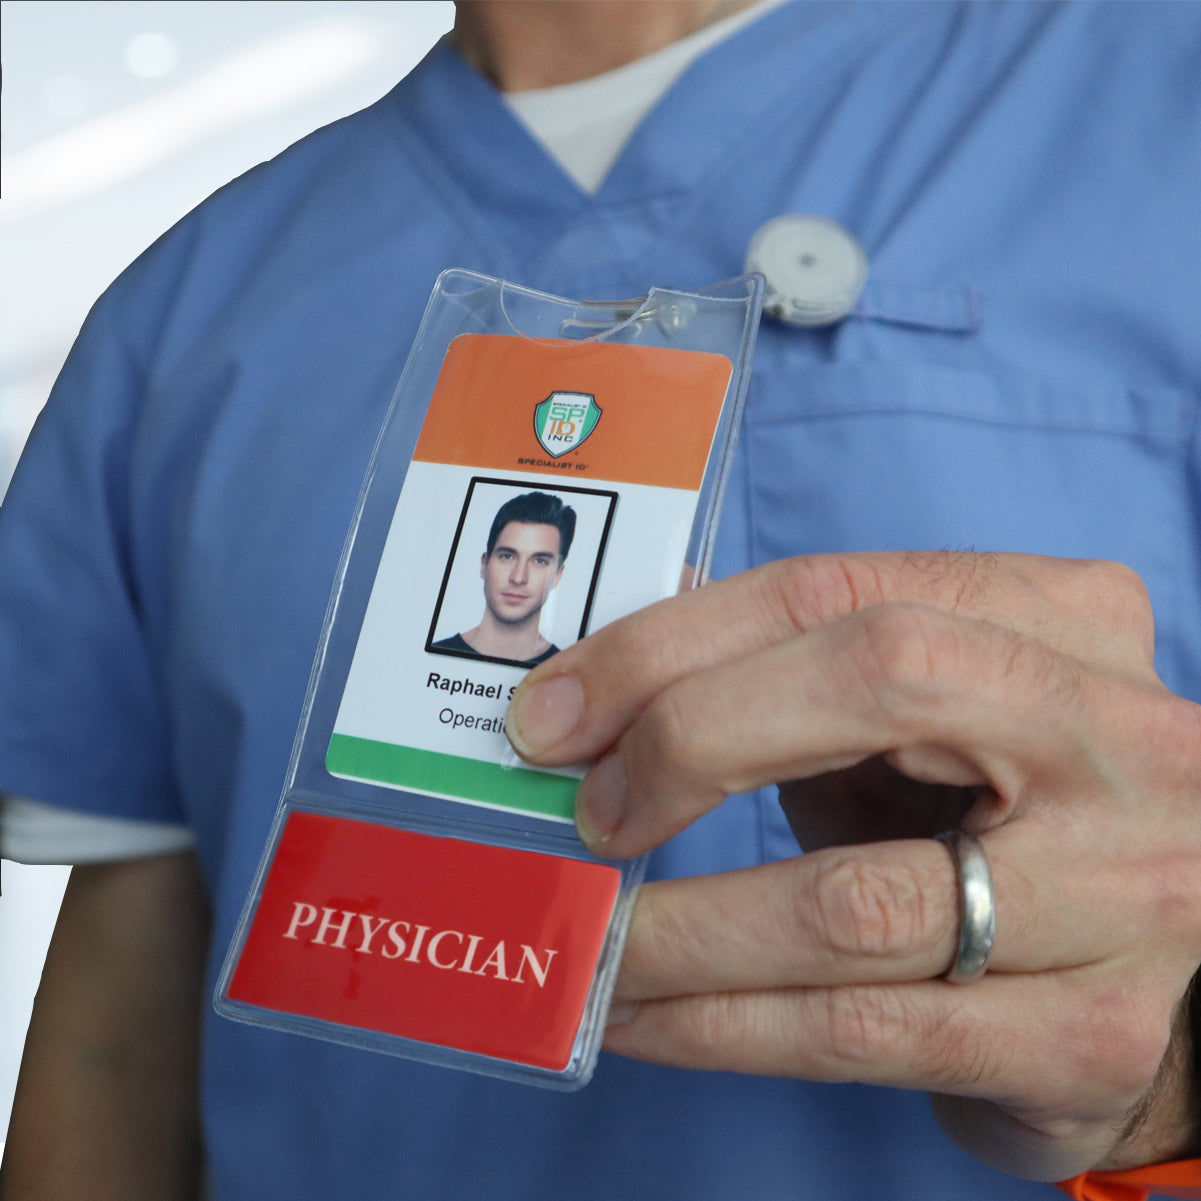 PHYSICIAN BadgeBottom ID Card and PHYSICIAN Badge Buddy all in one for healthcare professionals